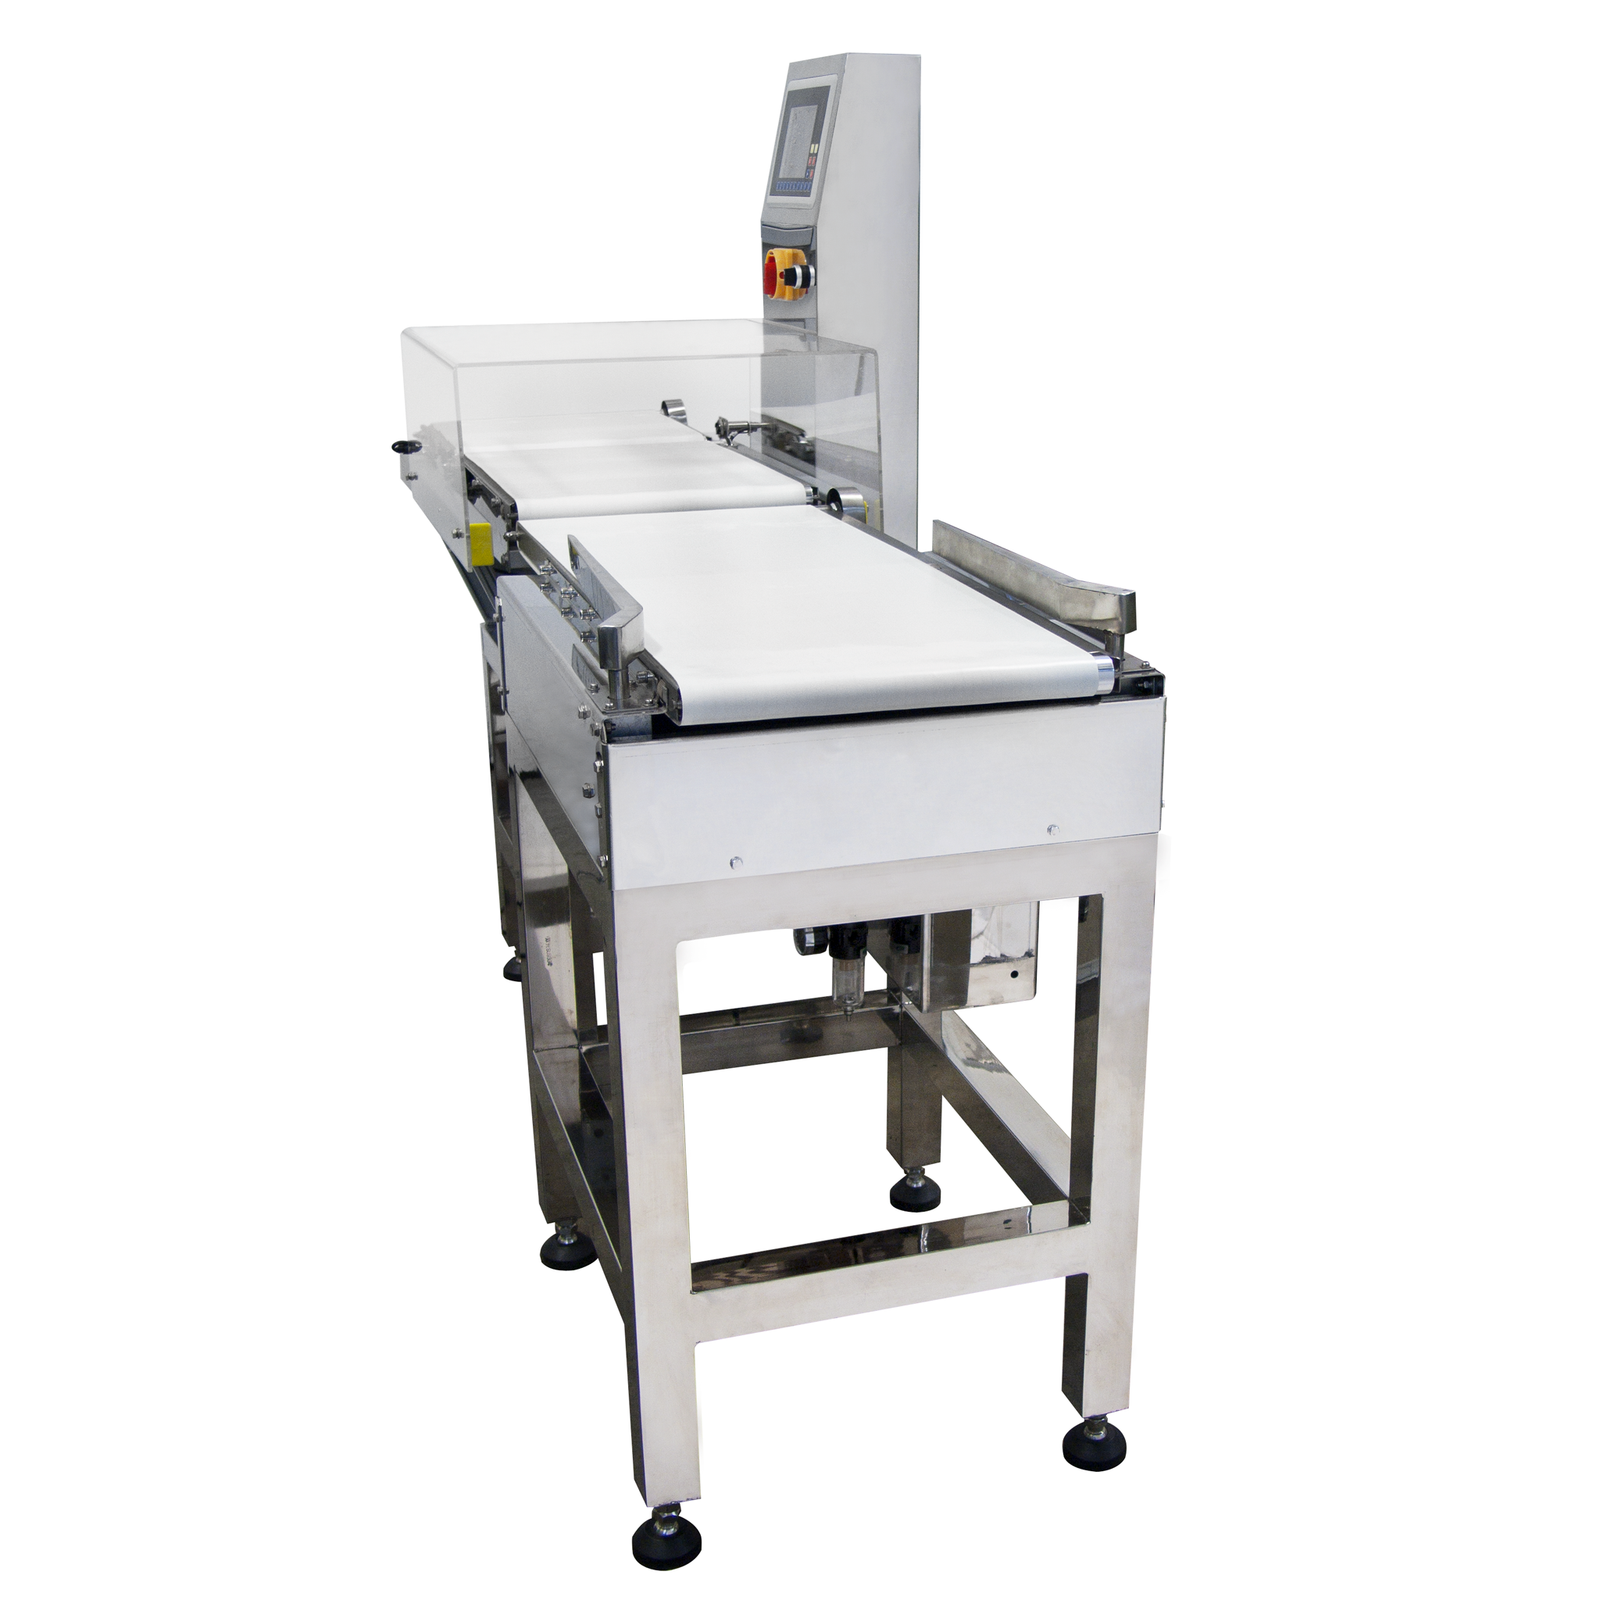 Side view of the stainless steel automatic digital JORESTECH checkweigher with white motorized conveyor belt